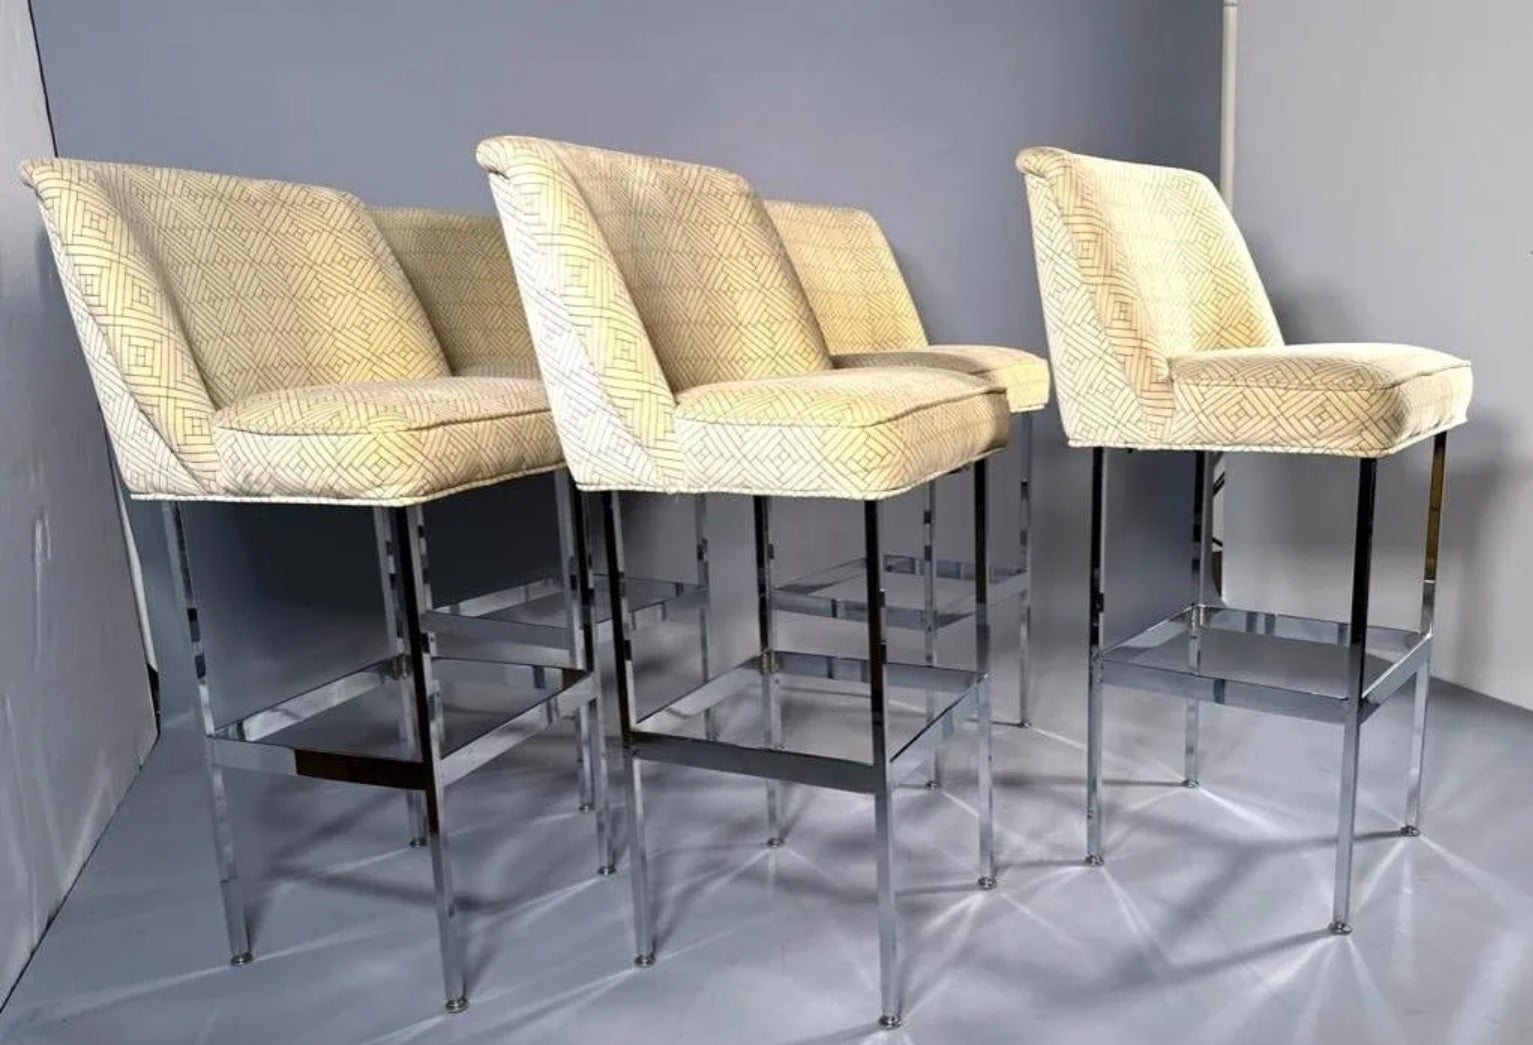 Set of five (5) chromed steel and velvet bar stools, 1970s. The seats and backs are fully upholstered in printed velvet with self-welt details; the squared chromed steel legs are joined by stretchers with foot rests. 